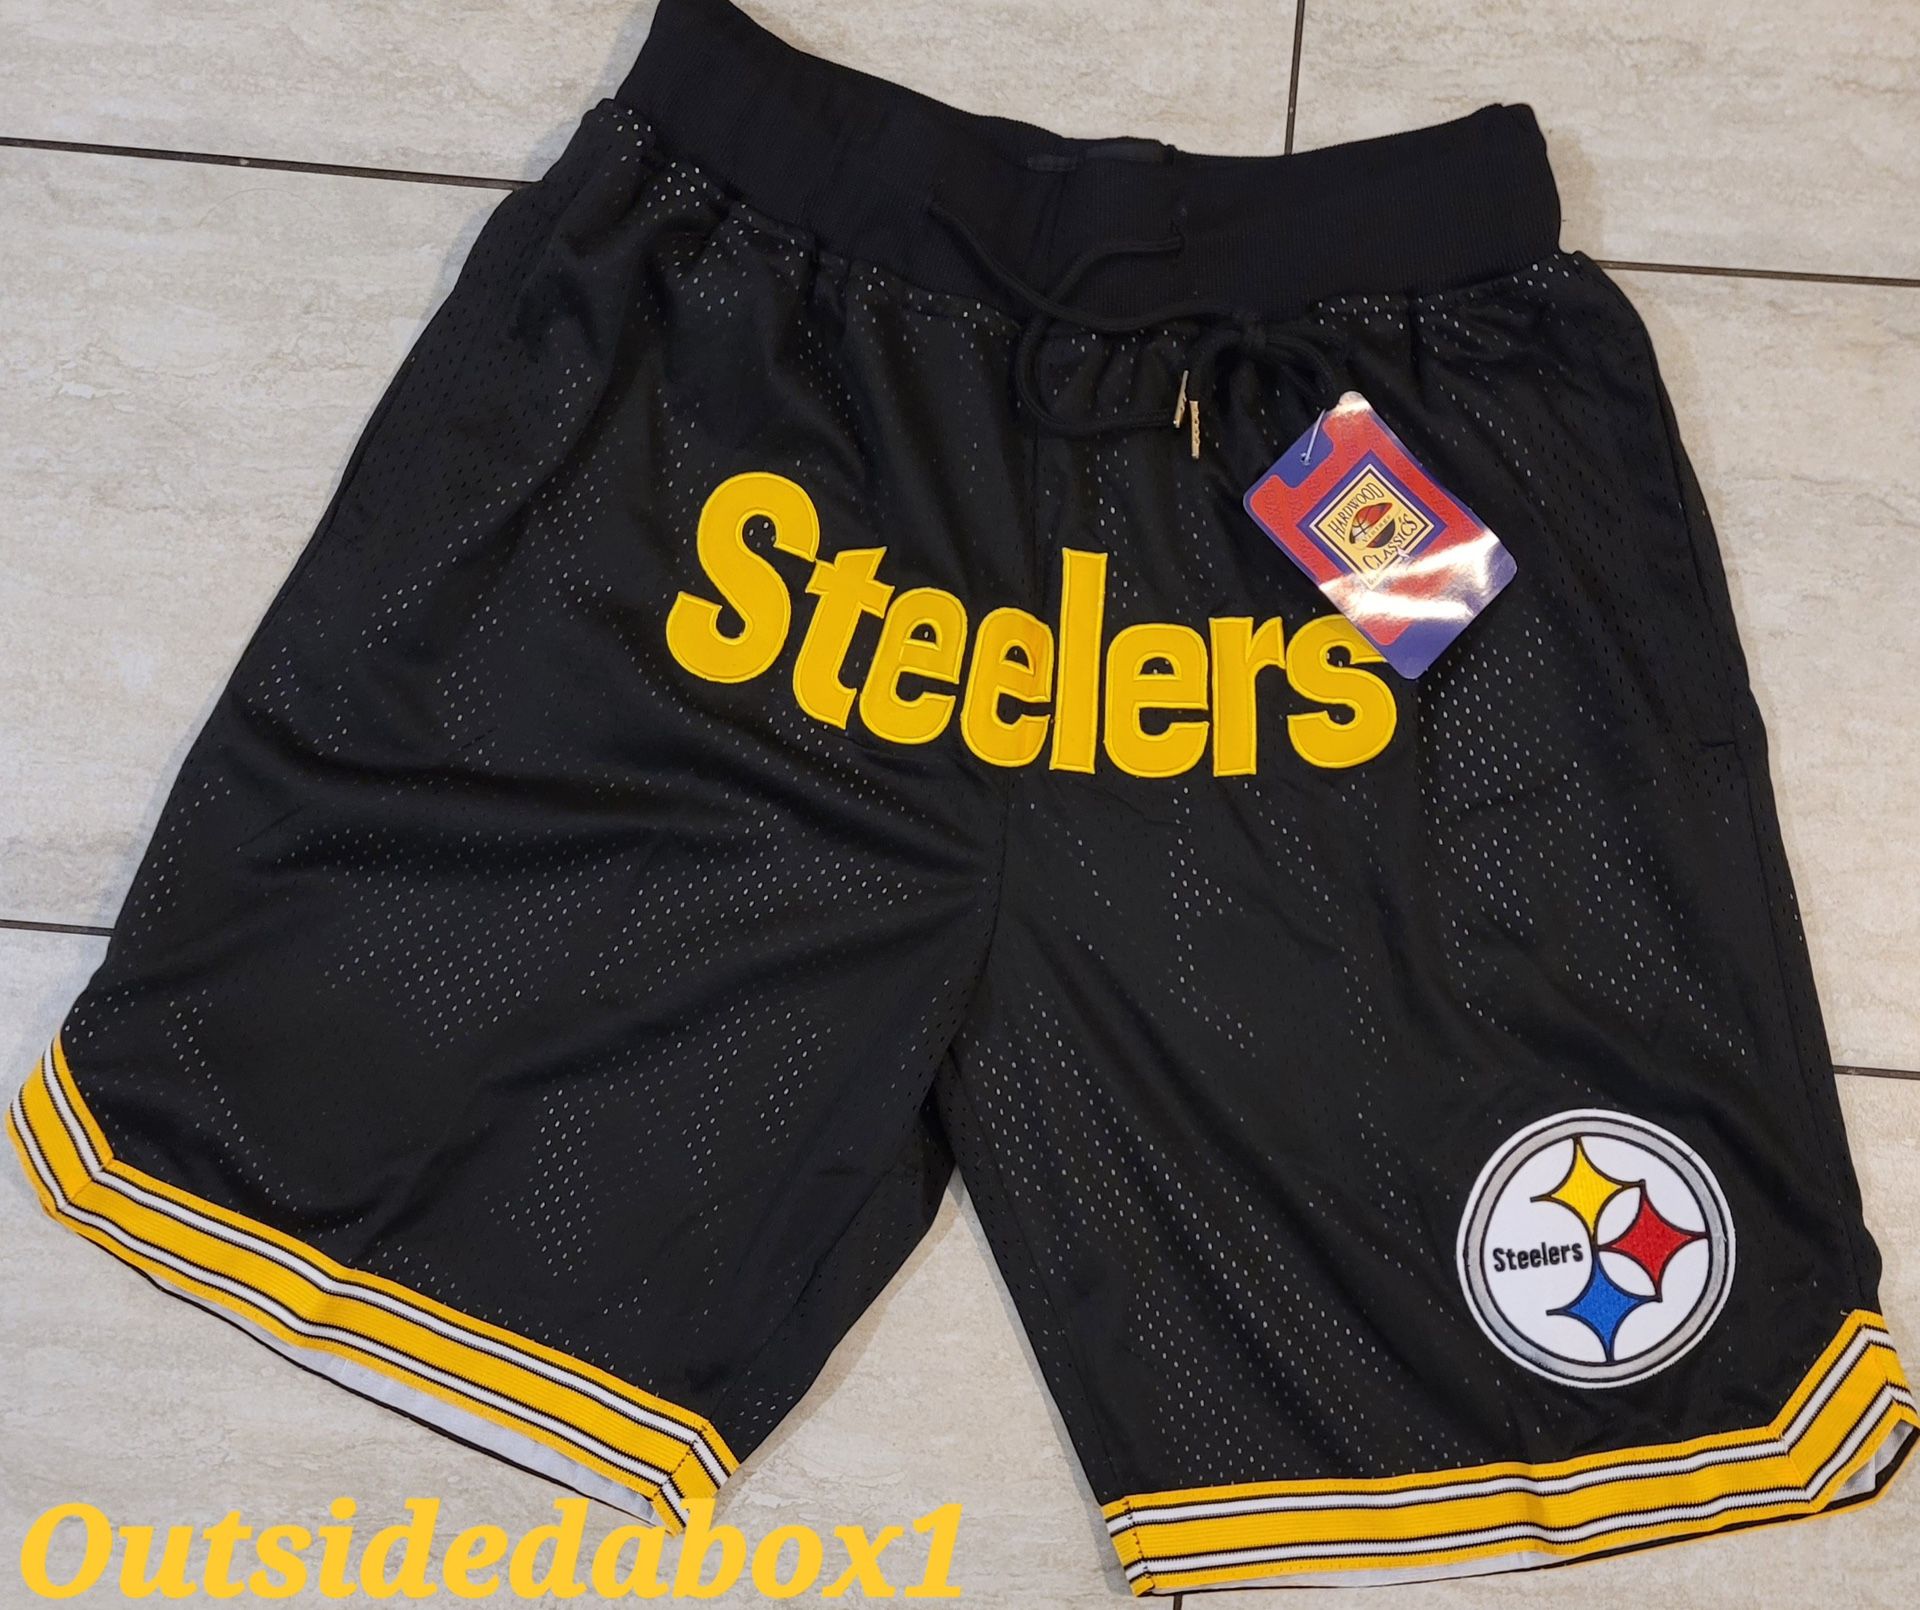 Pittsburgh Steelers Shorts With Pockets New!!! Fast Shipping 📬 Available Men's Sizes